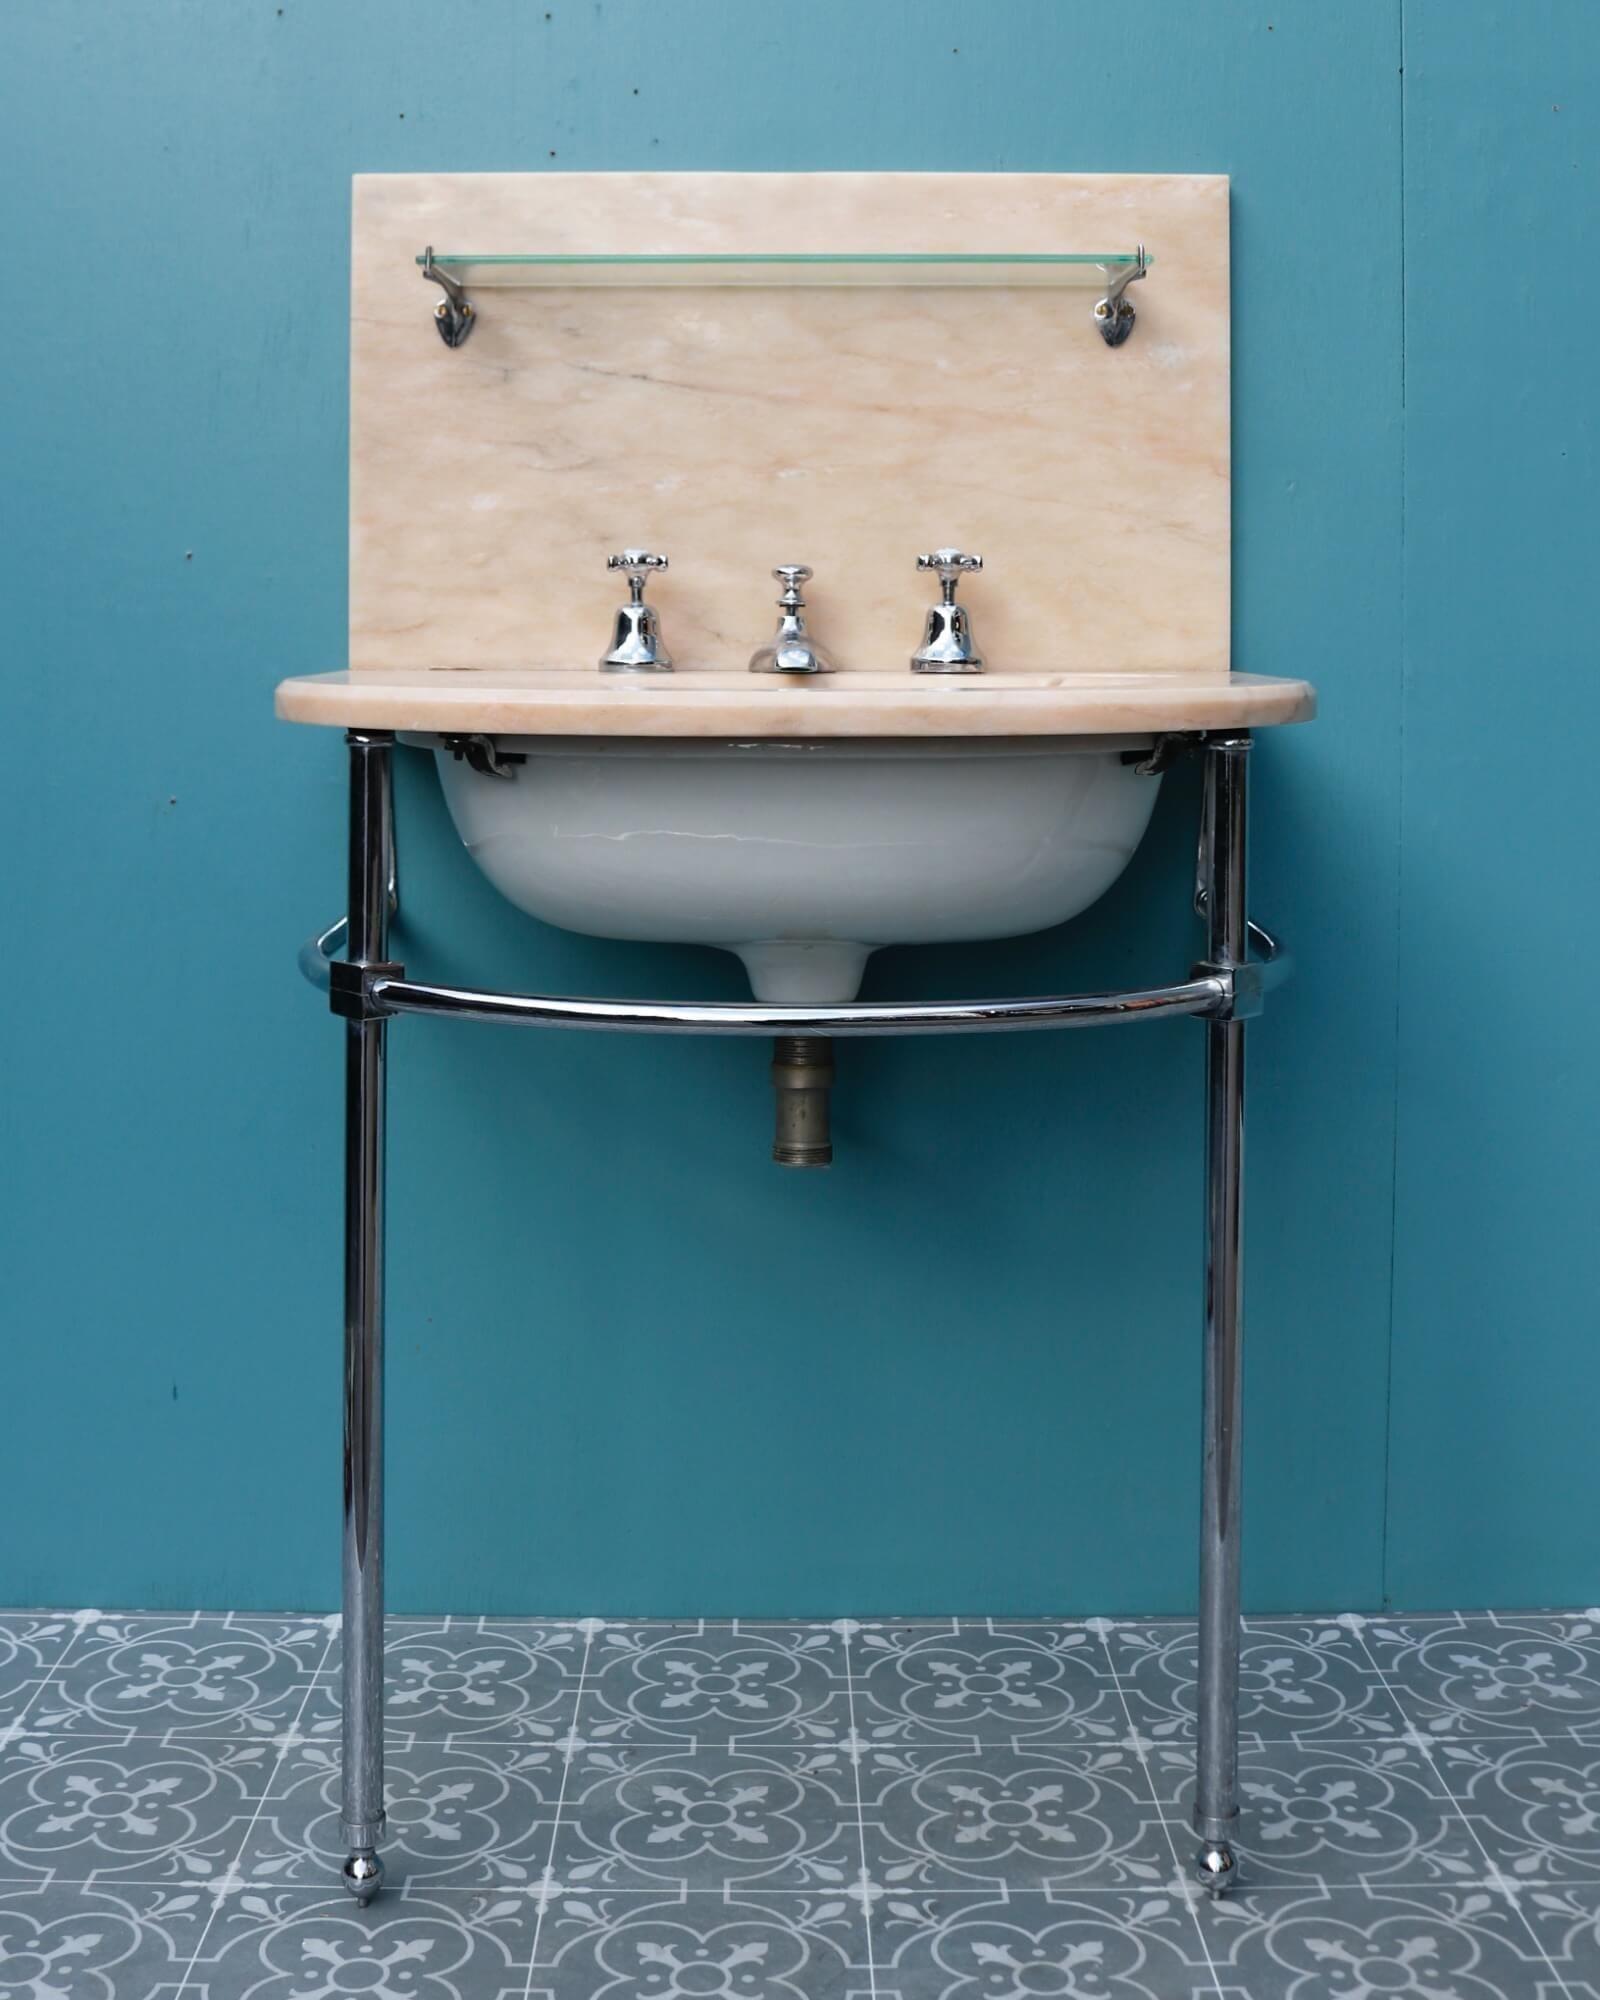 An English Art Deco style marble washstand with chromed fittings by John Bolding & Sons dating from the 1940s. Reclaimed from a property in Haywards Heath UK, this smart antique bathroom basin is a stunning washstand for a luxurious midcentury style